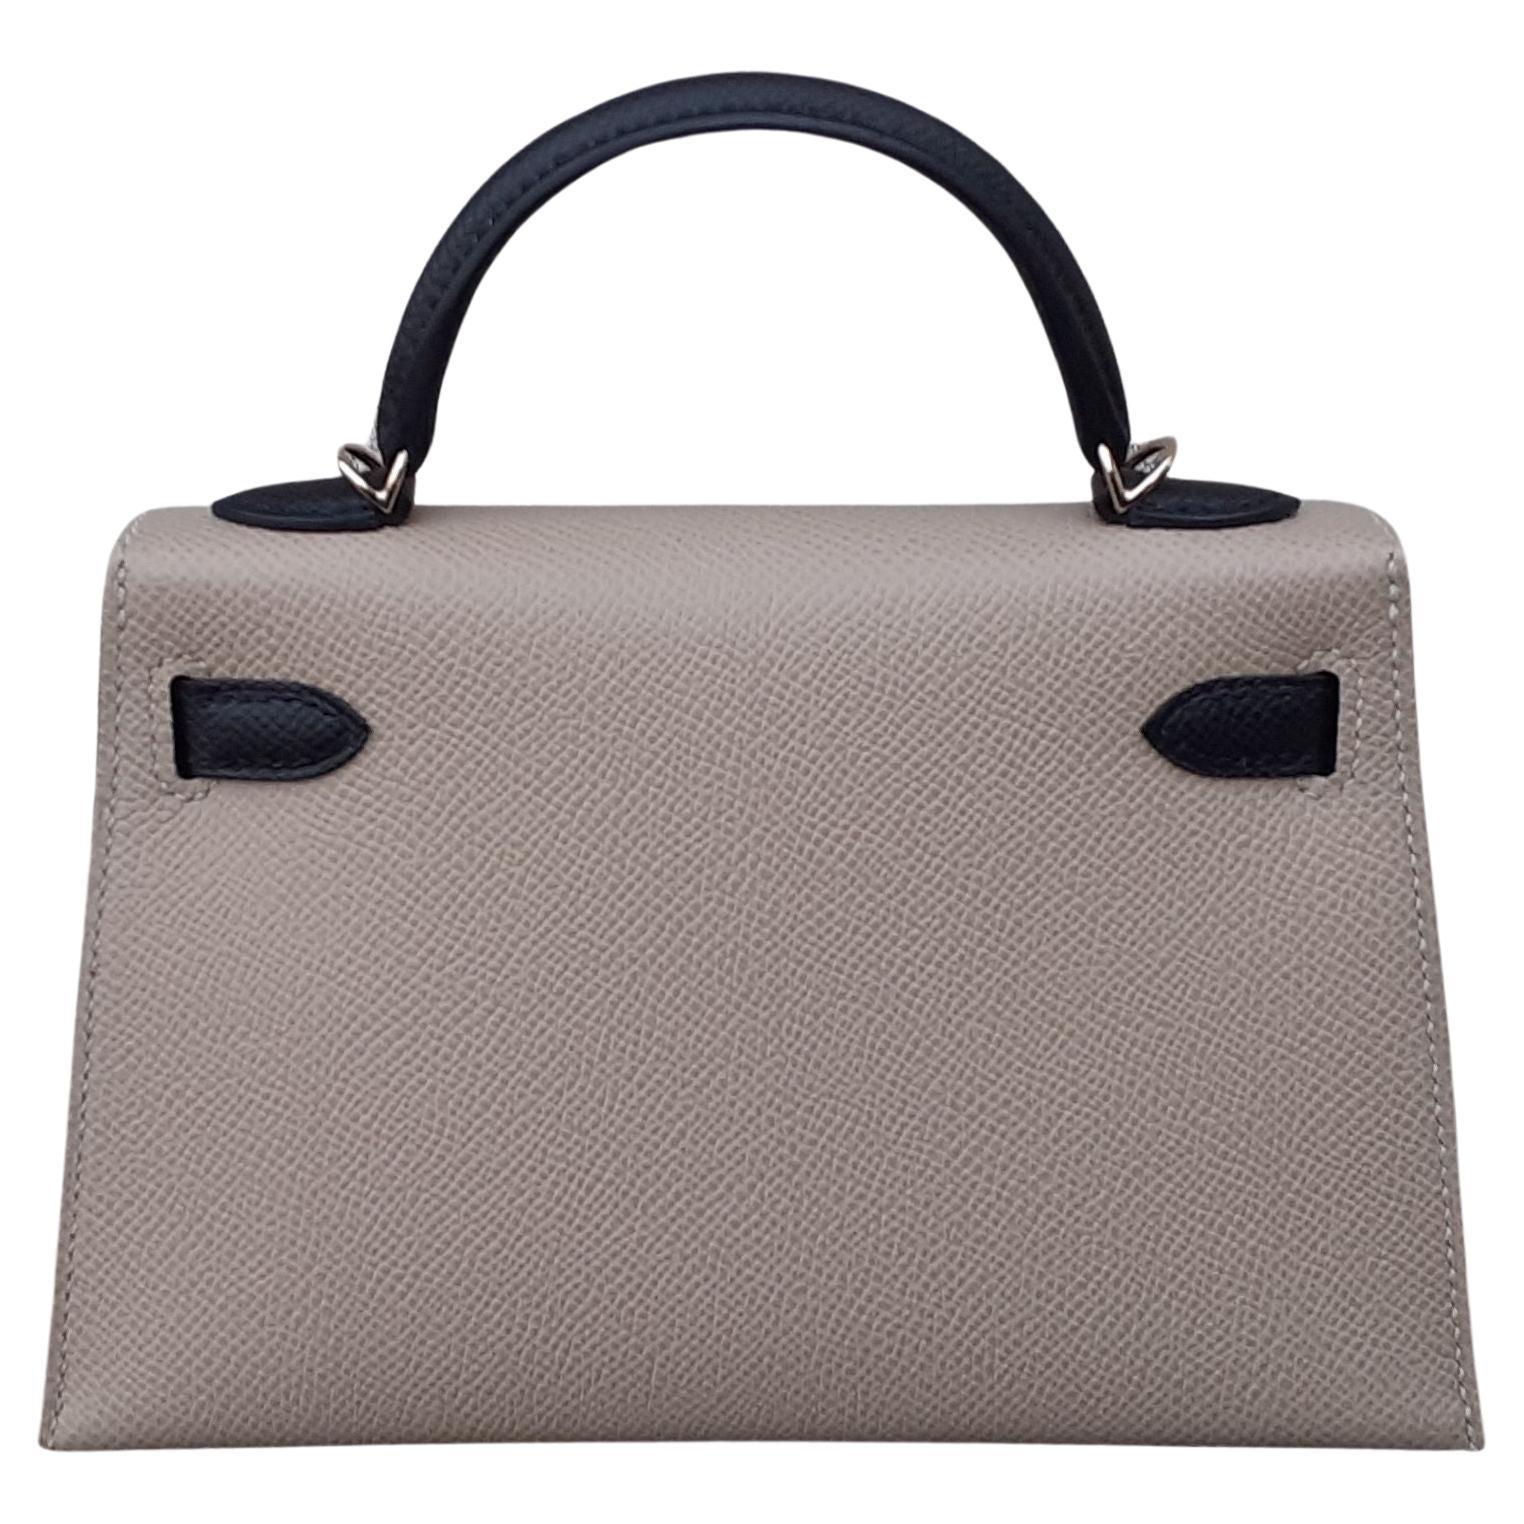  Exceptionnel Hermès Mini Kelly II Epsom Trench Black Permabrass Hdw SO Pour femmes 